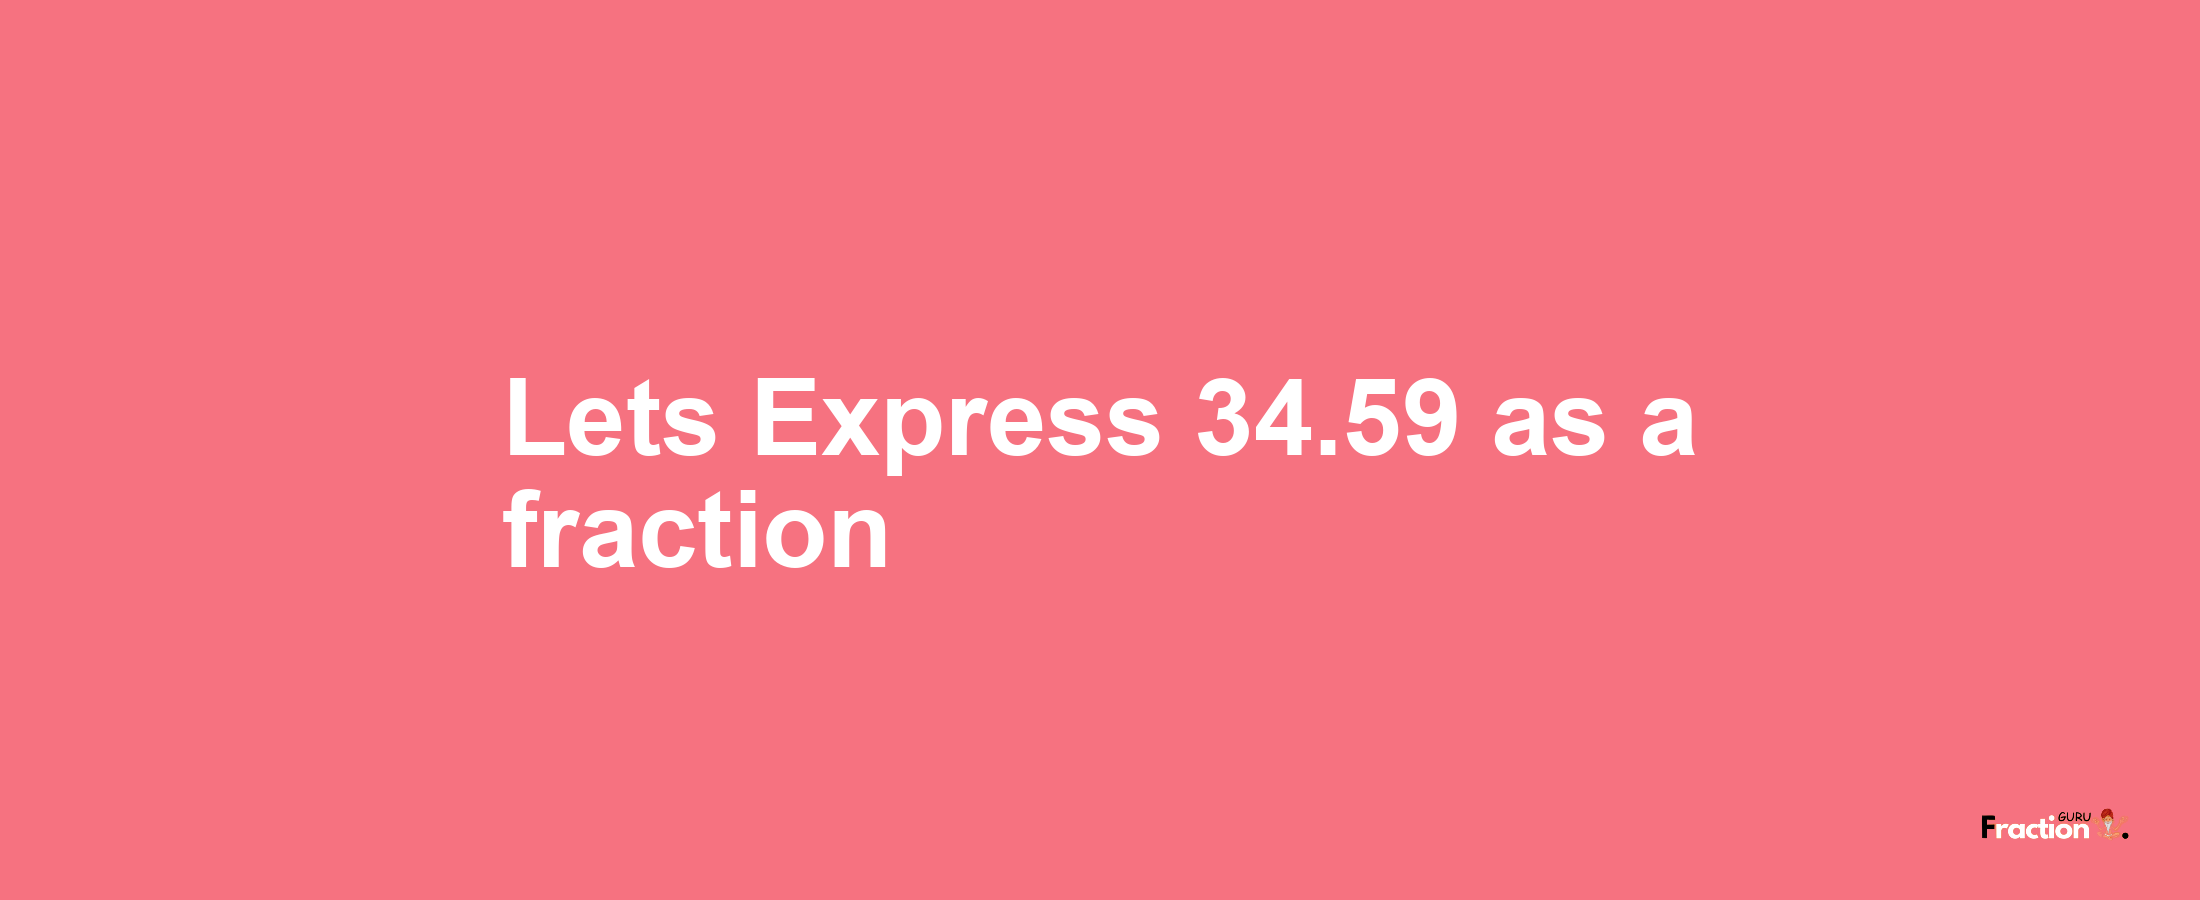 Lets Express 34.59 as afraction